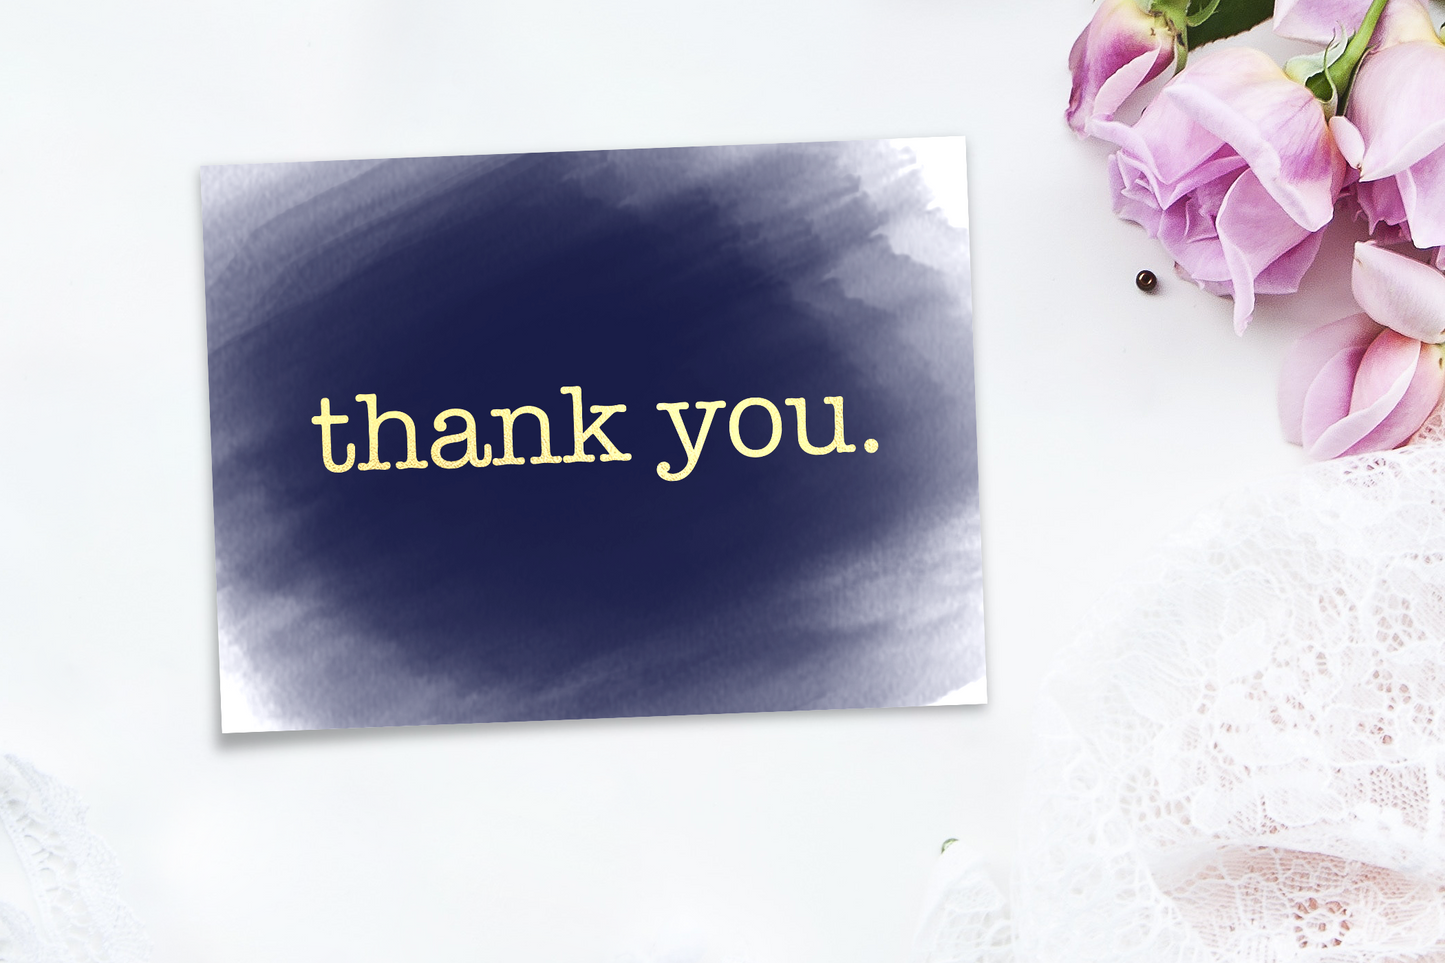 Foiled thank you card